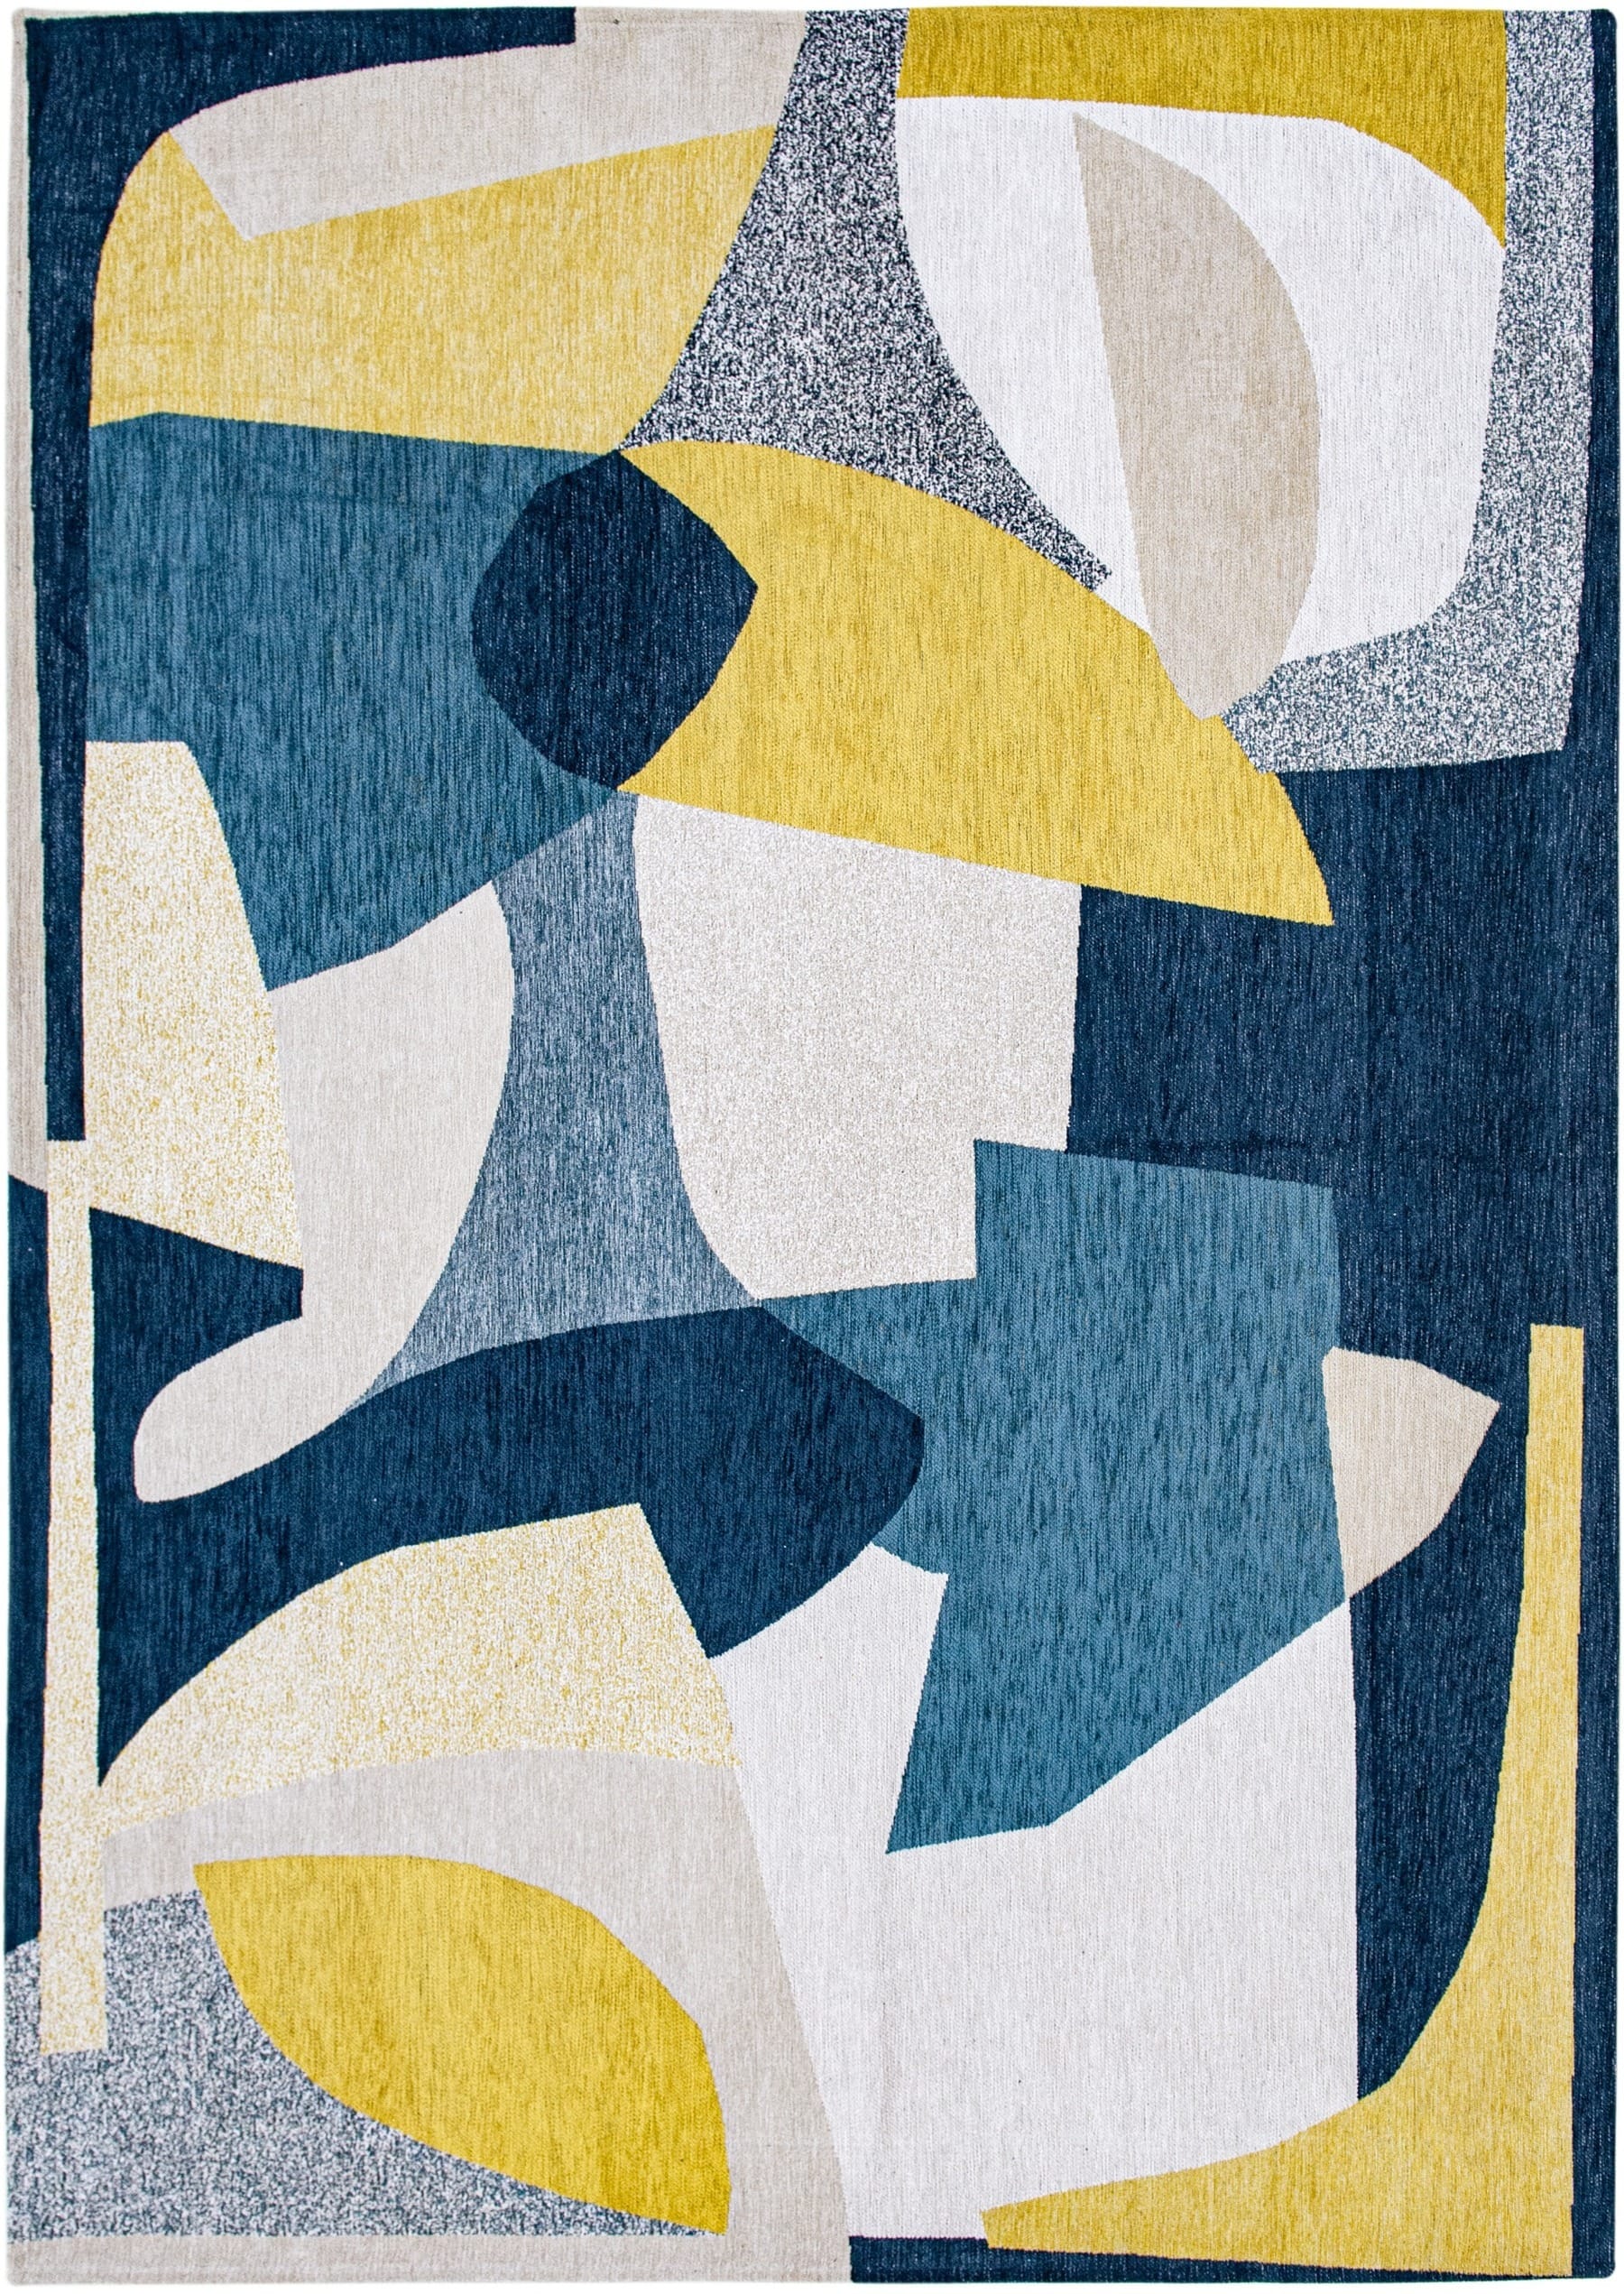 Gallery Collection Shapes Duck Song 9369 rug by Louis De Poortere